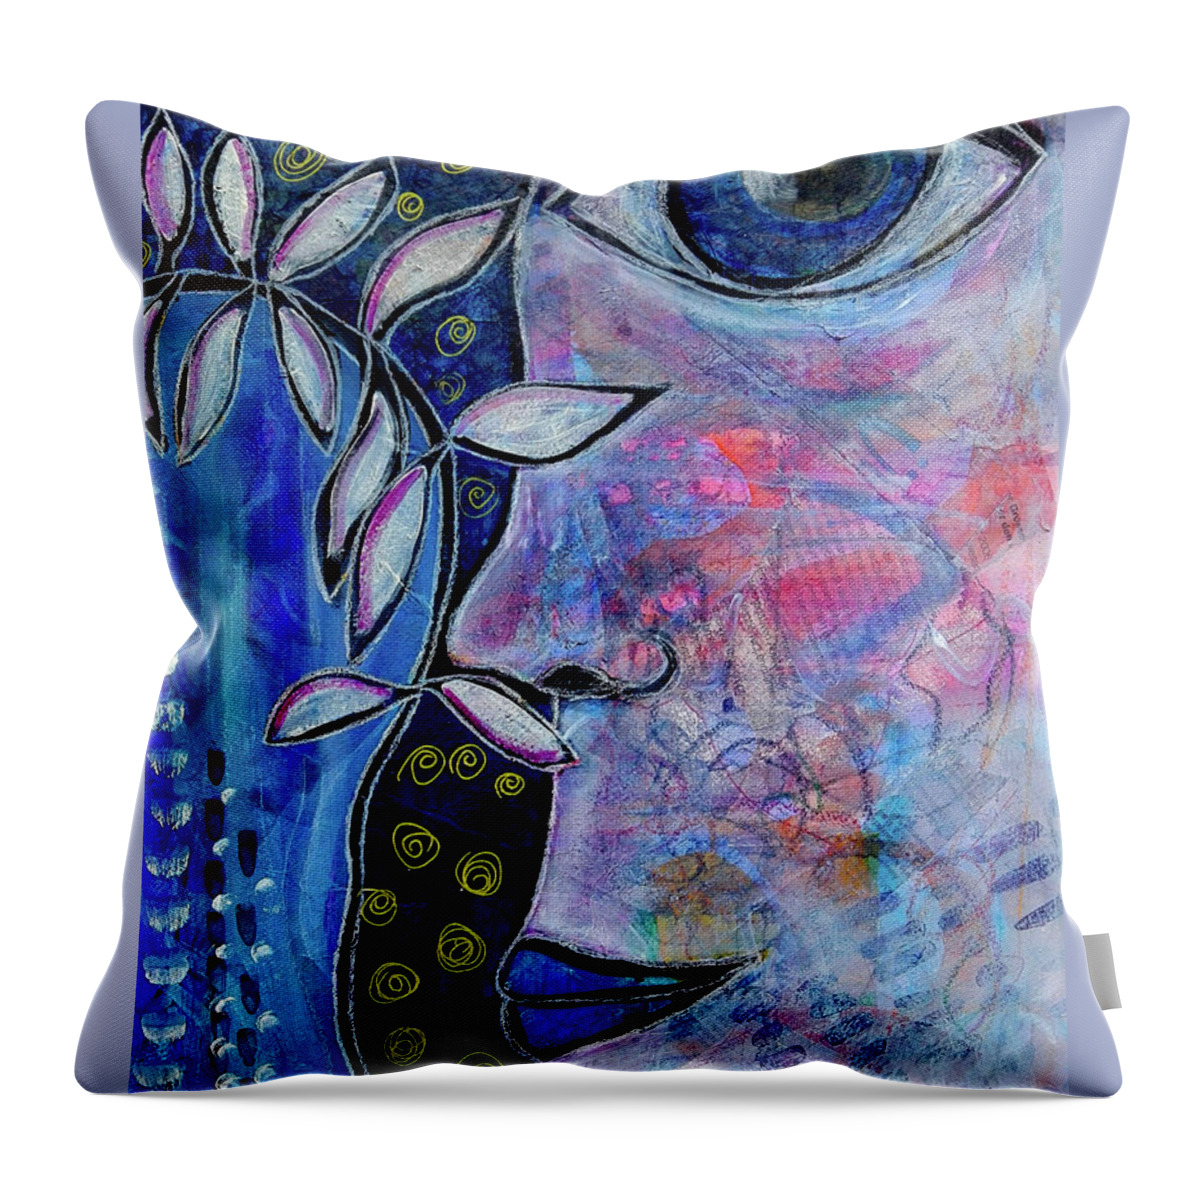 Seer Throw Pillow featuring the mixed media The Seer by Mimulux Patricia No